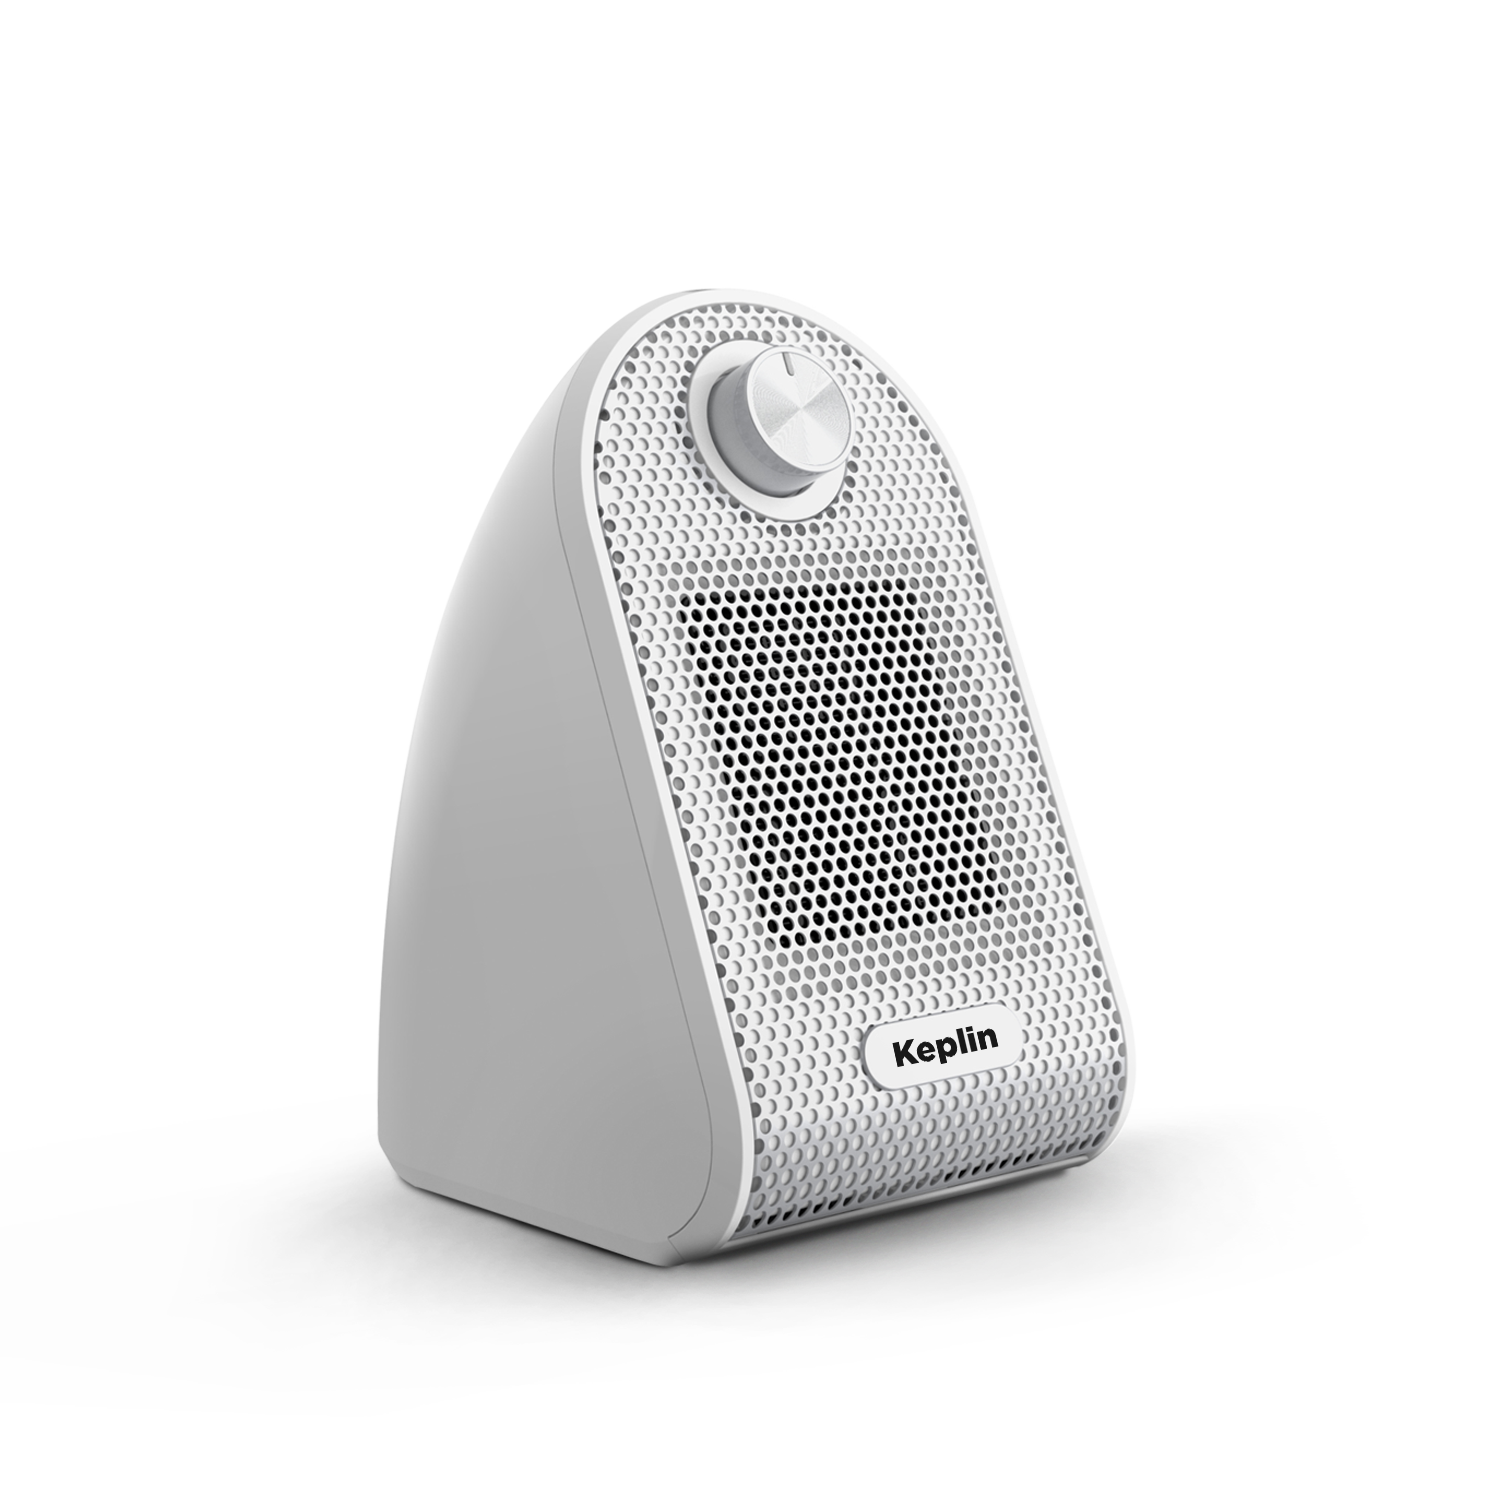 Ceramic Desk Heater - Low Energy Consumption and Mini Portable Plug-in Electric Heater